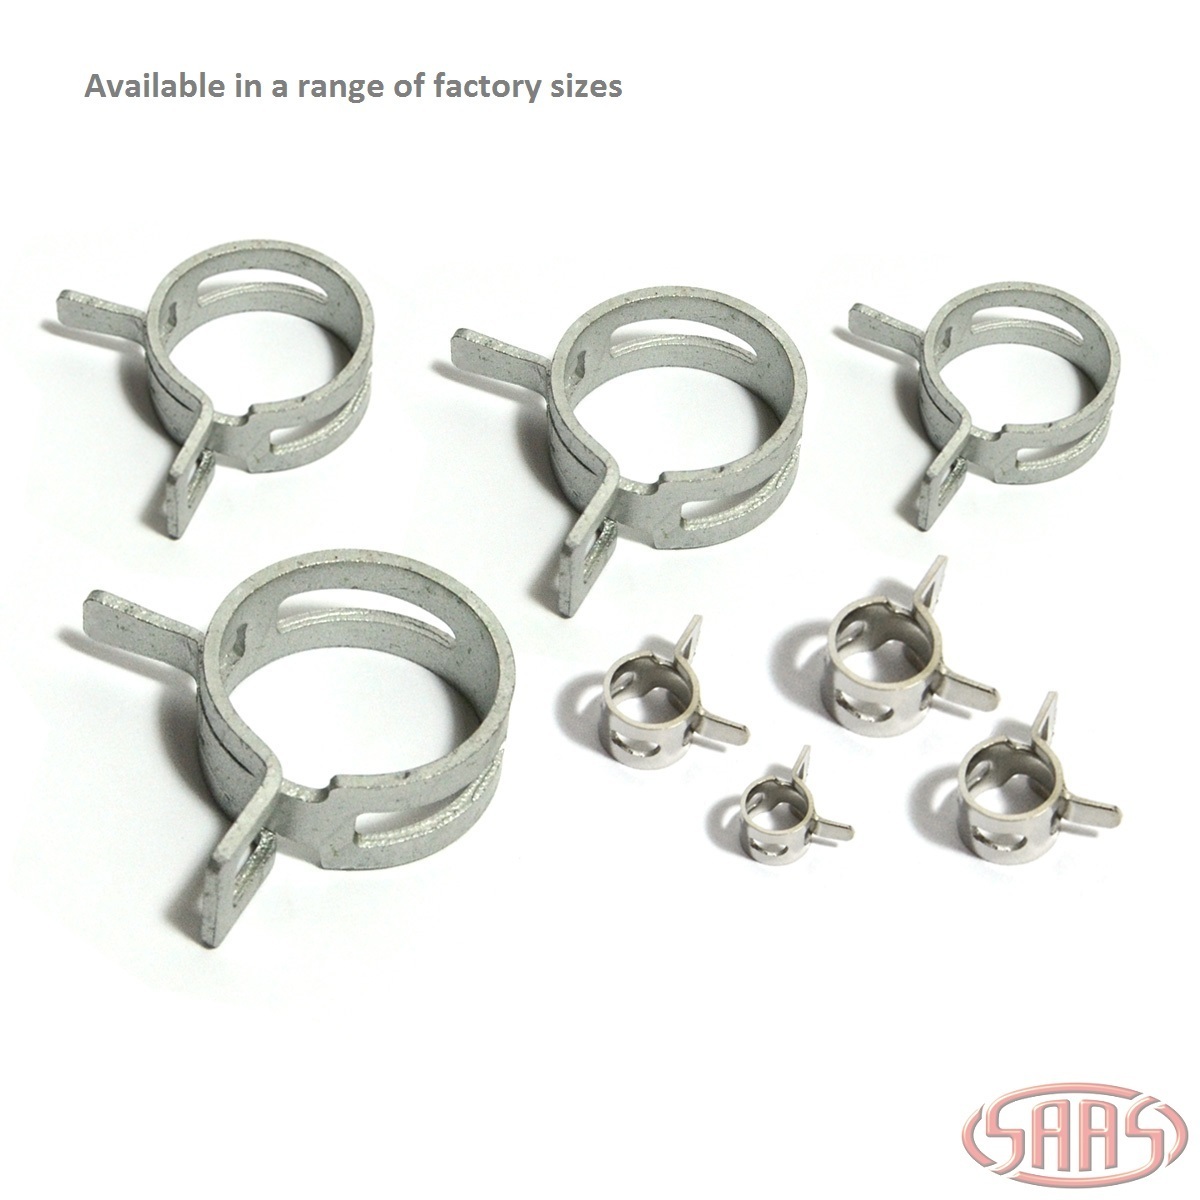 Hose Clamps Spring Size 16 these suit 16mm (5/8") hose Pack of 2